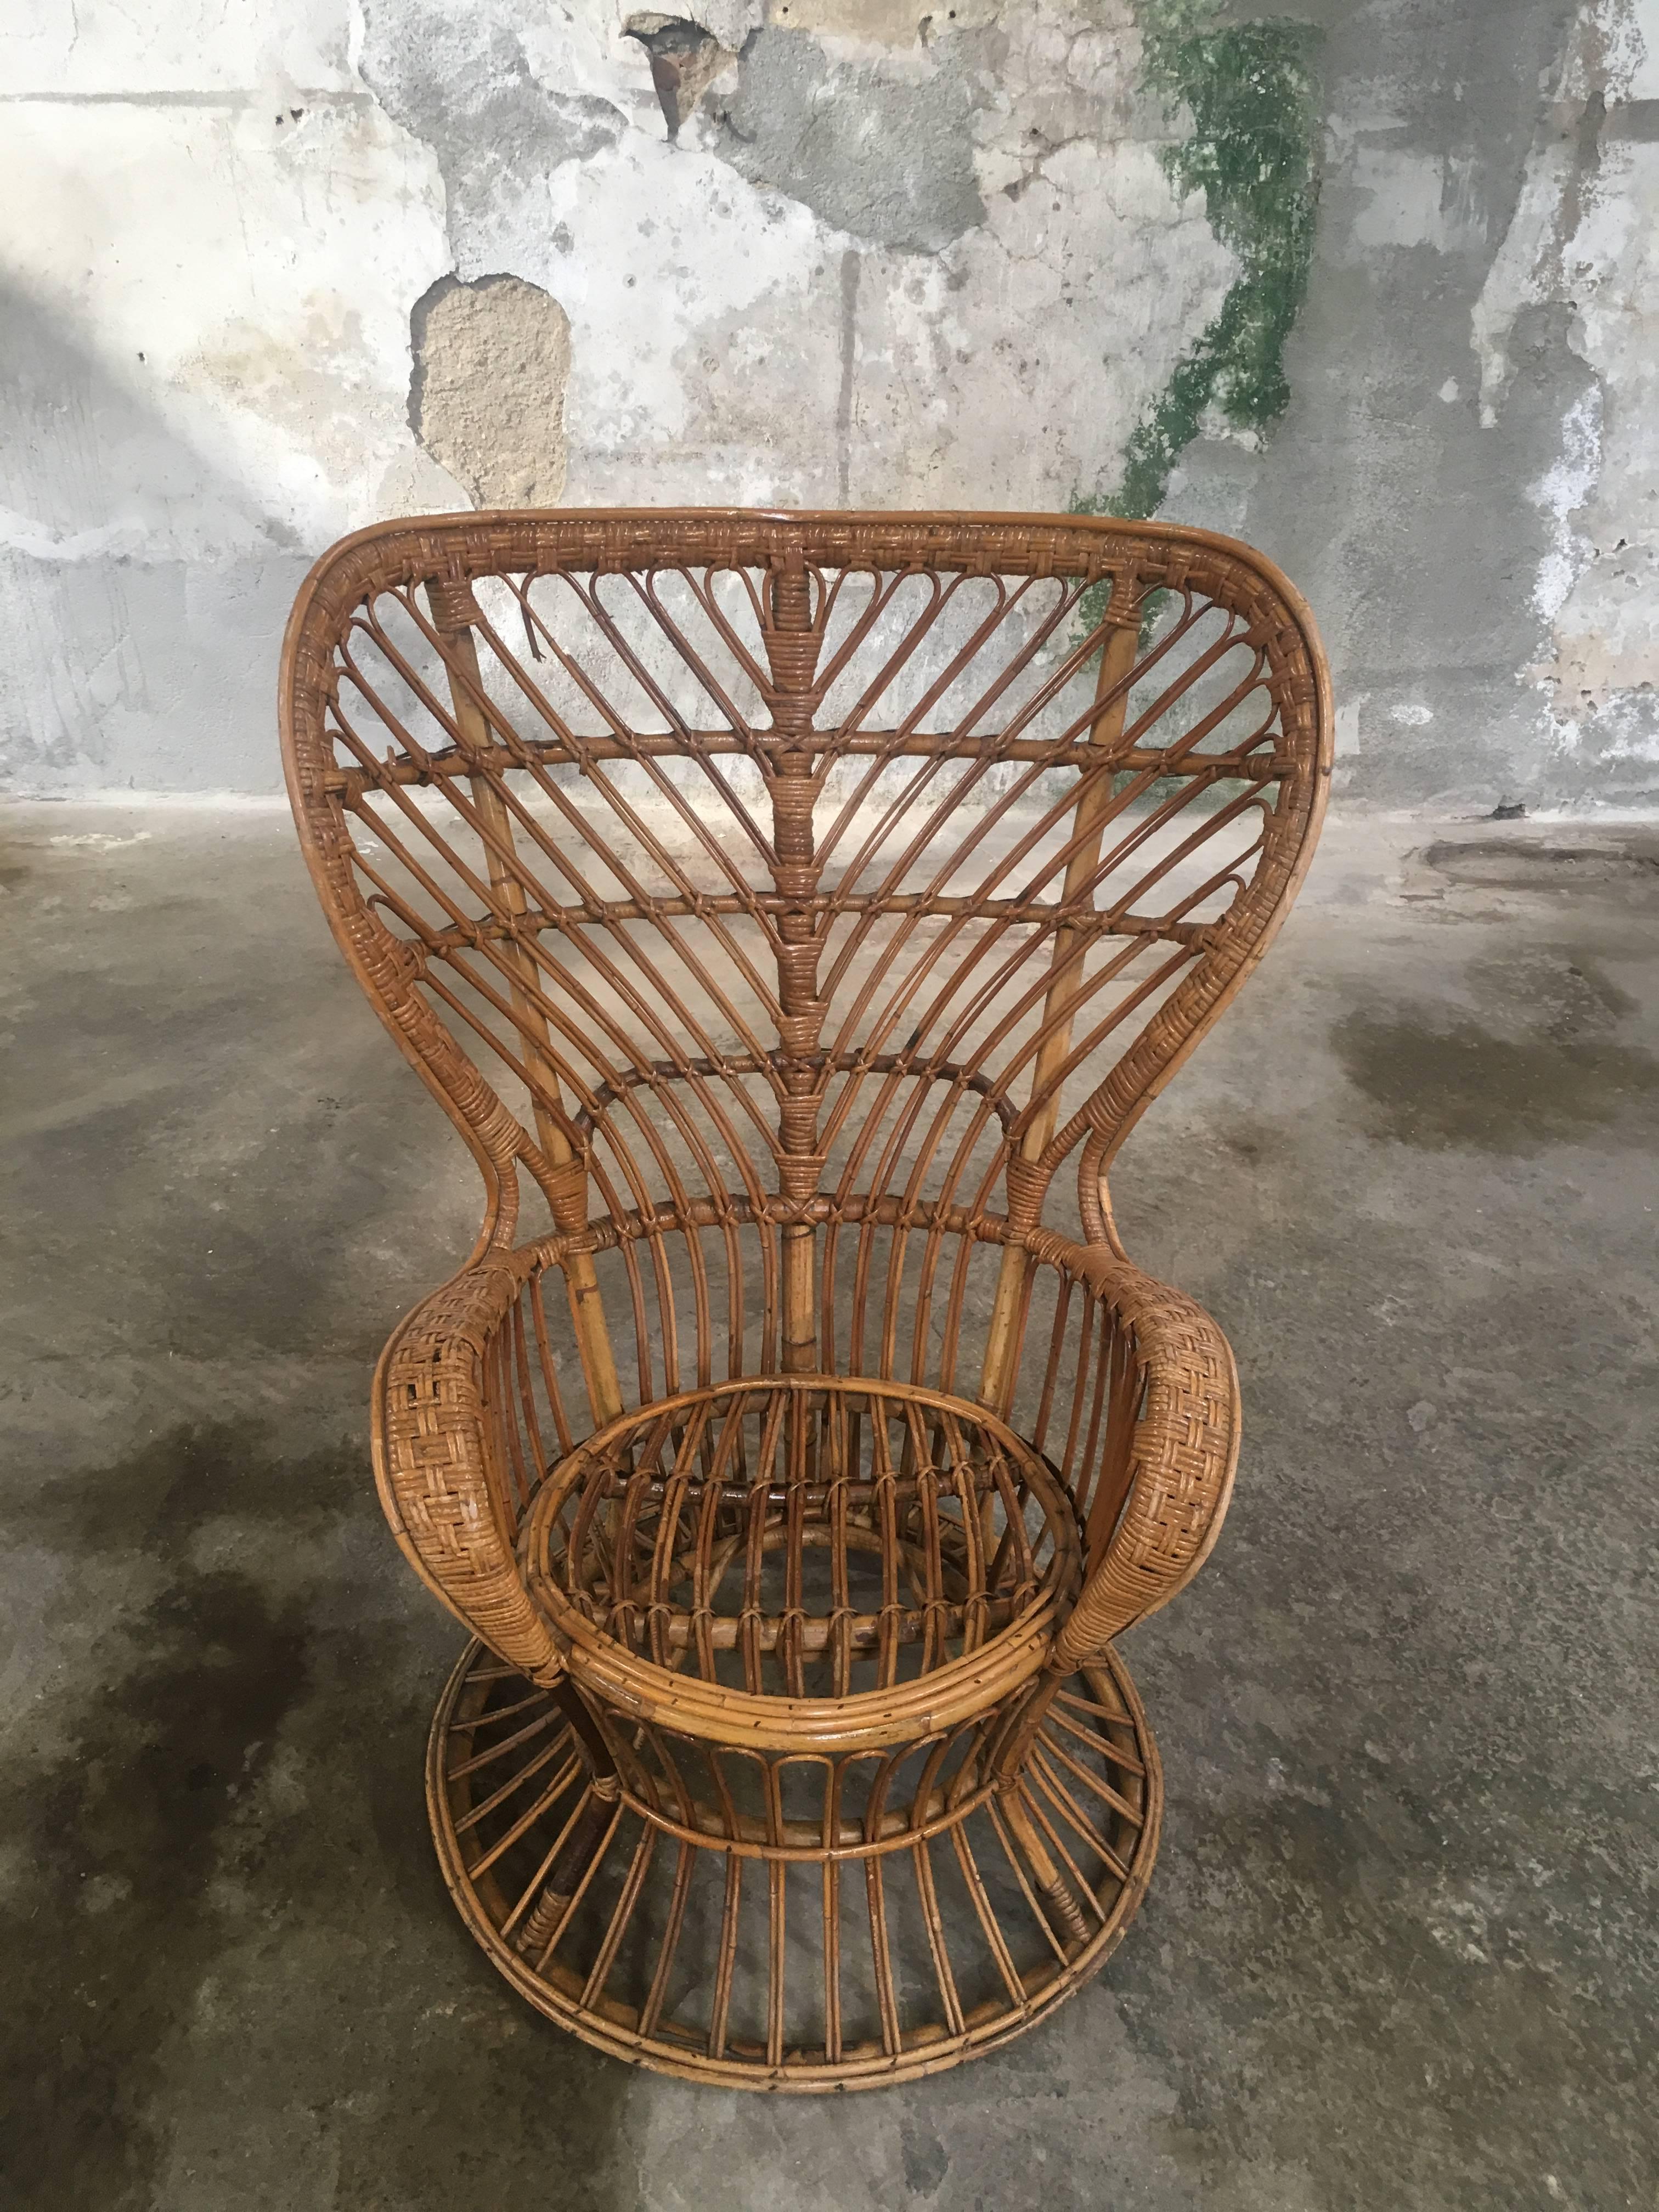 High quality rattan chair designed by Lio Carminati for the Cruiser 